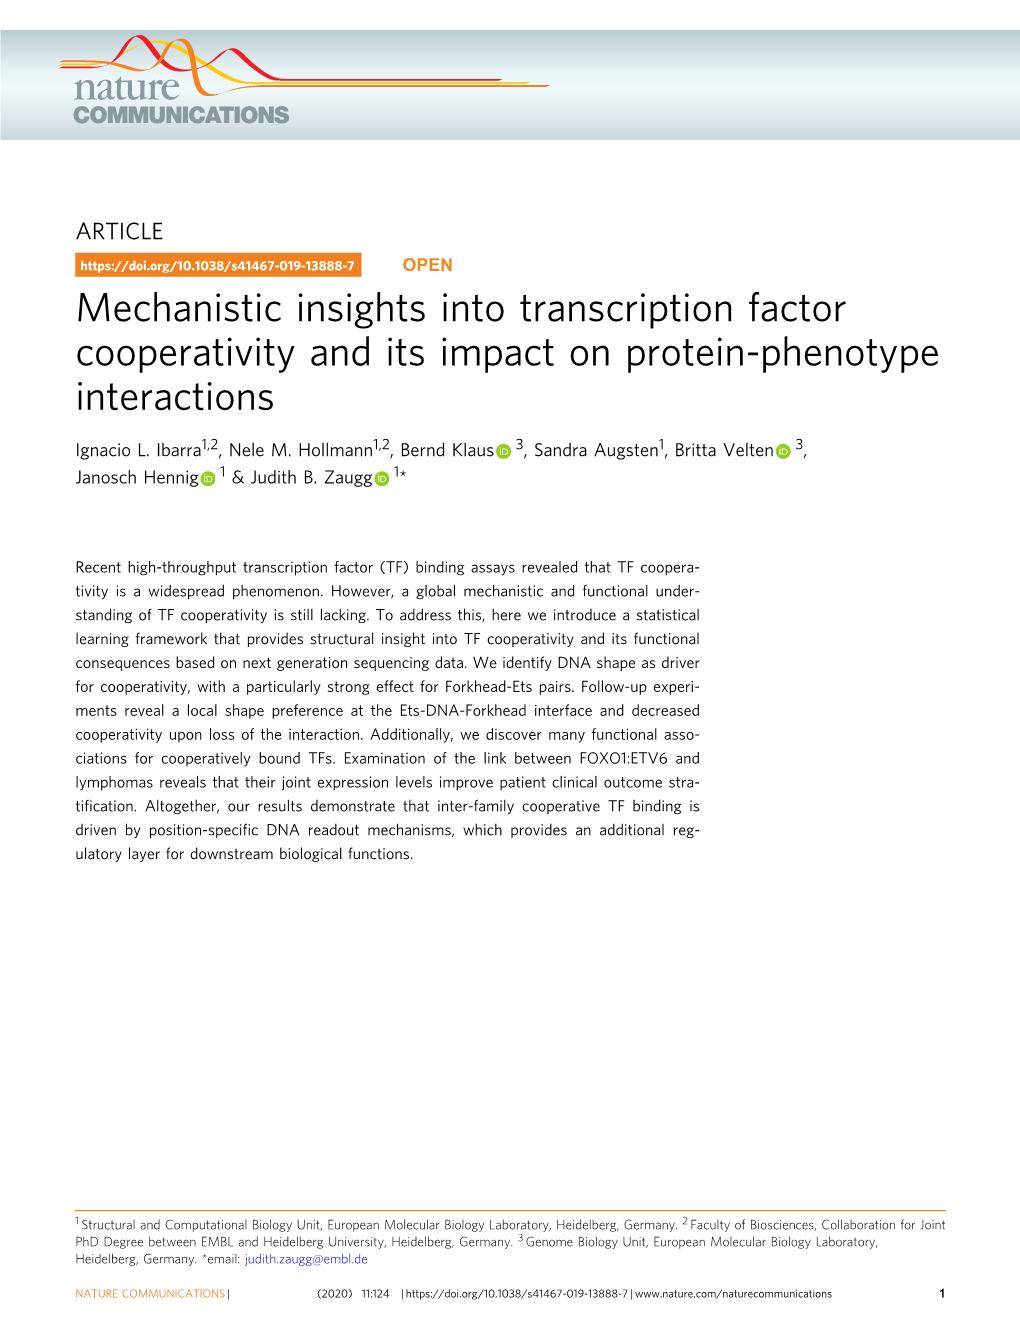 Mechanistic Insights Into Transcription Factor Cooperativity and Its Impact on Protein-Phenotype Interactions